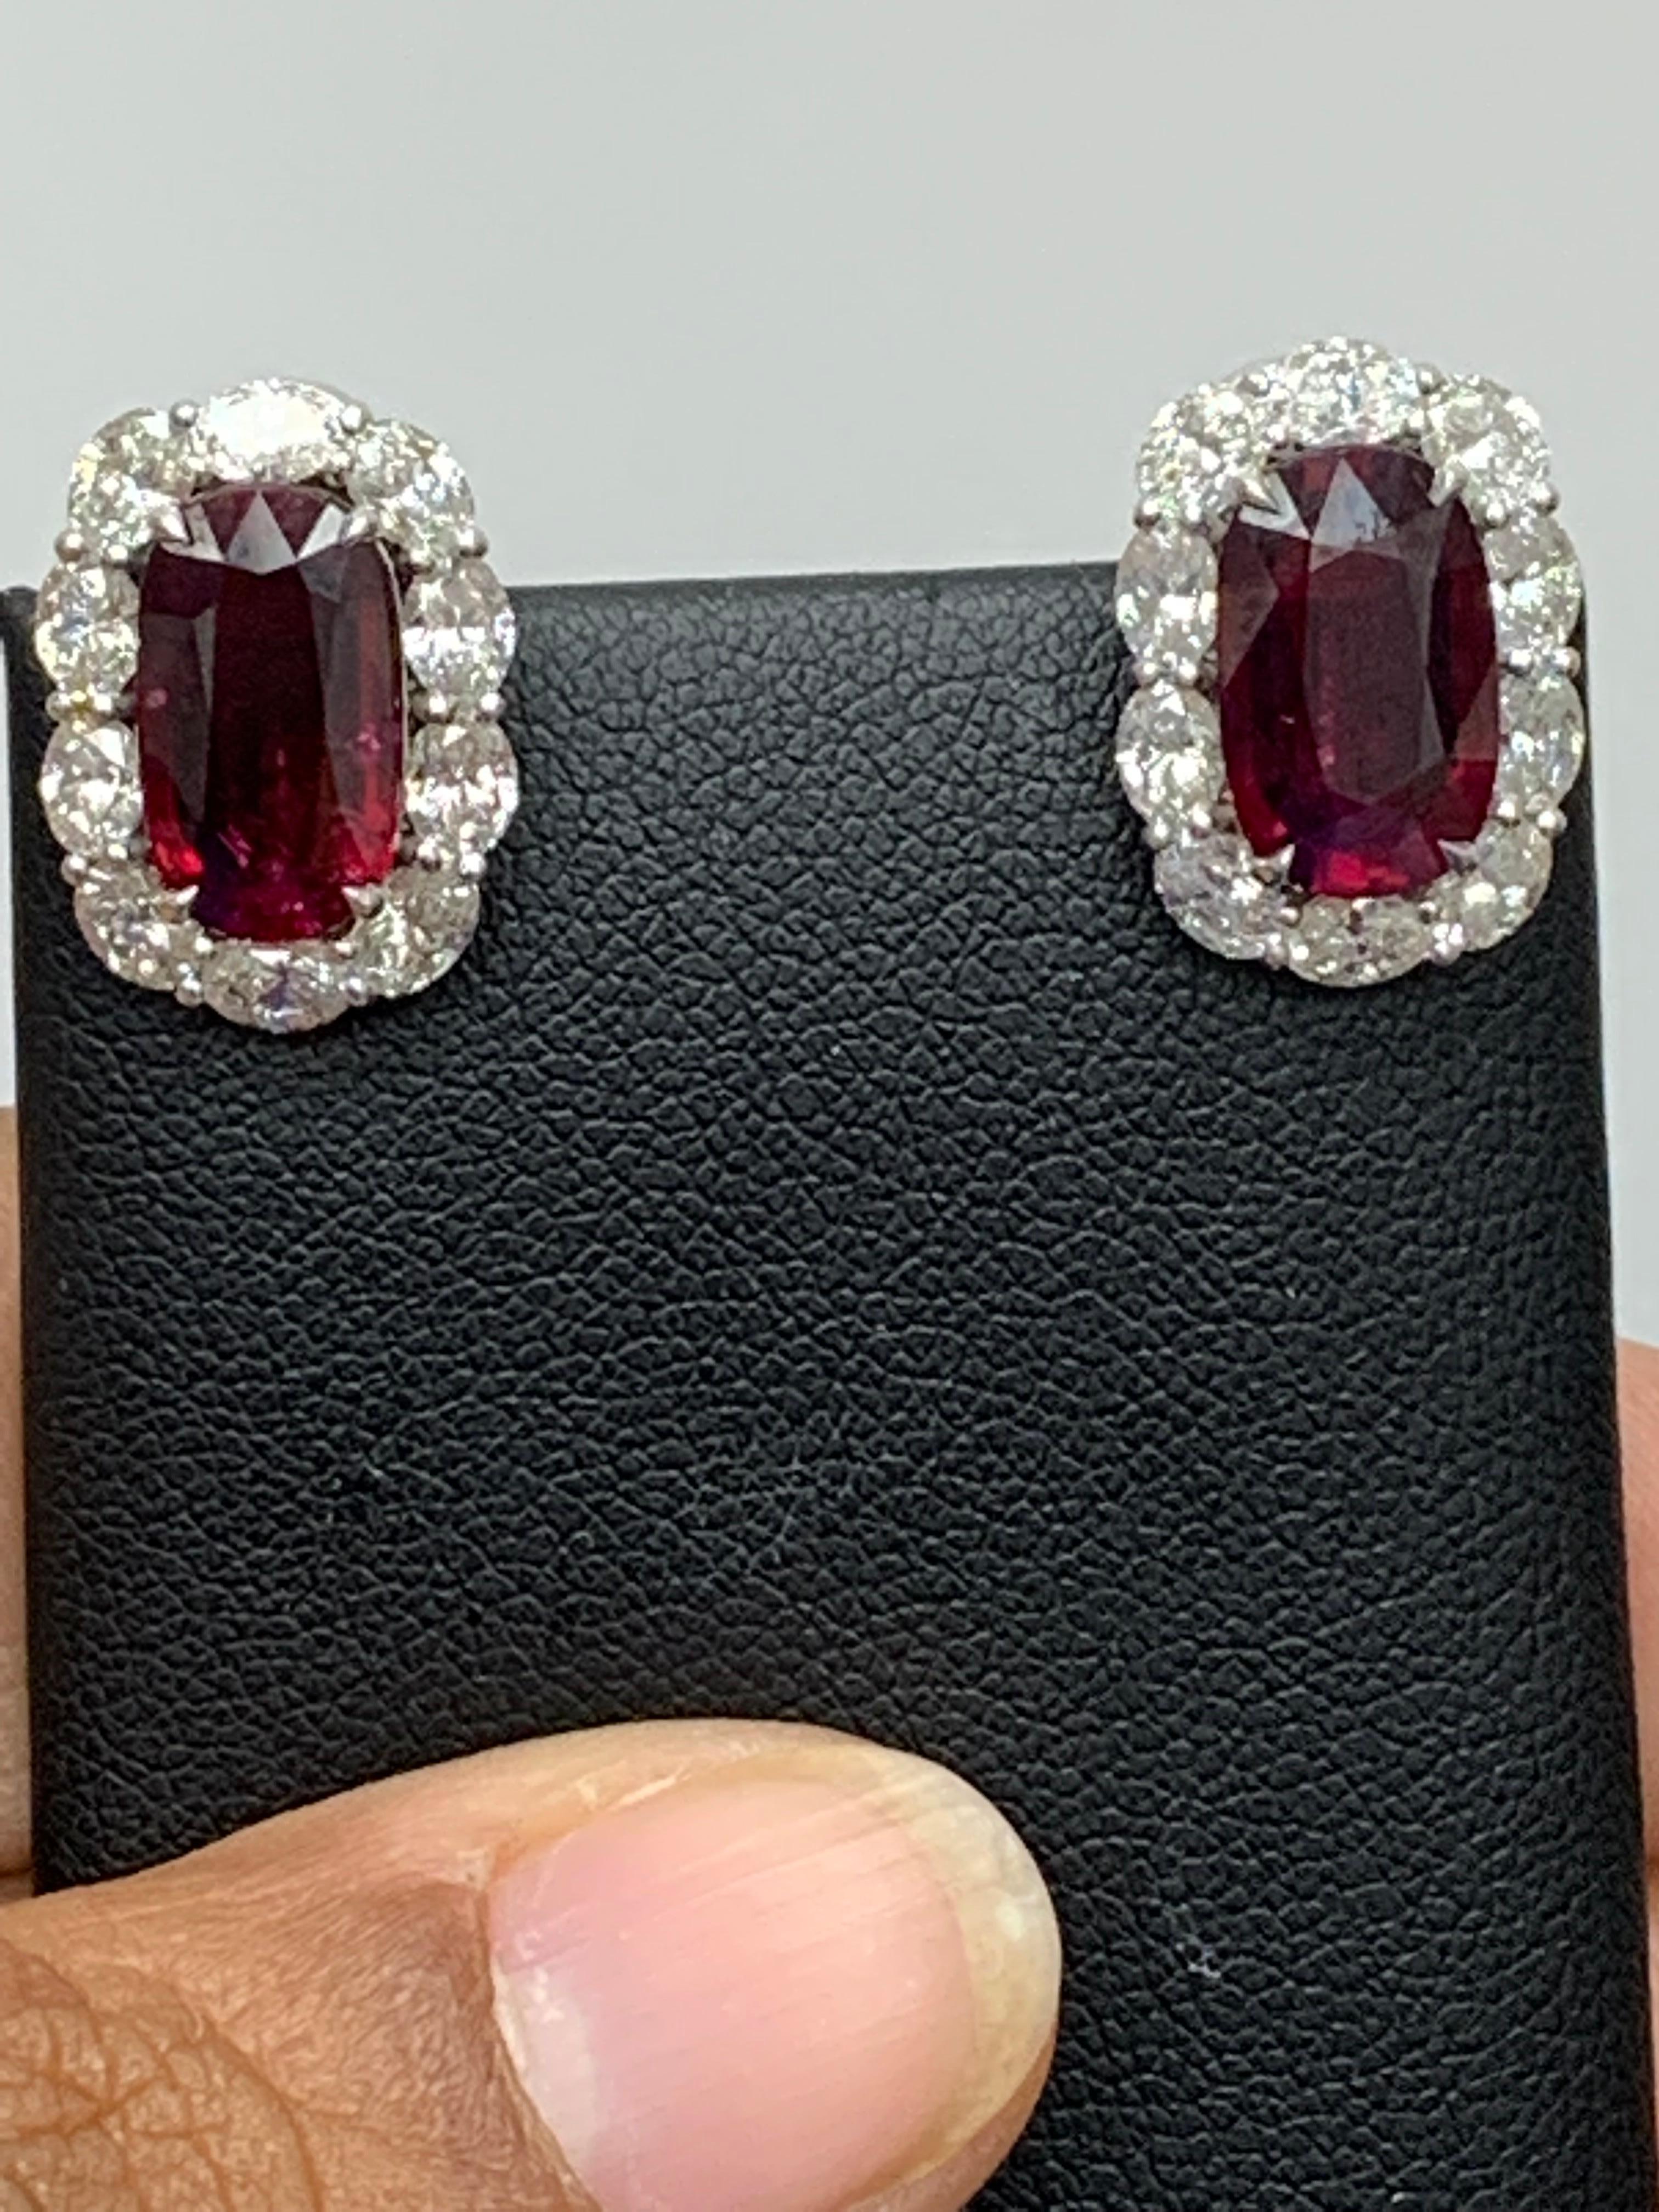 CERTIFIED 6.15 Carat Cushion Cut Ruby and Diamond Halo Earring in 18K White Gold For Sale 2